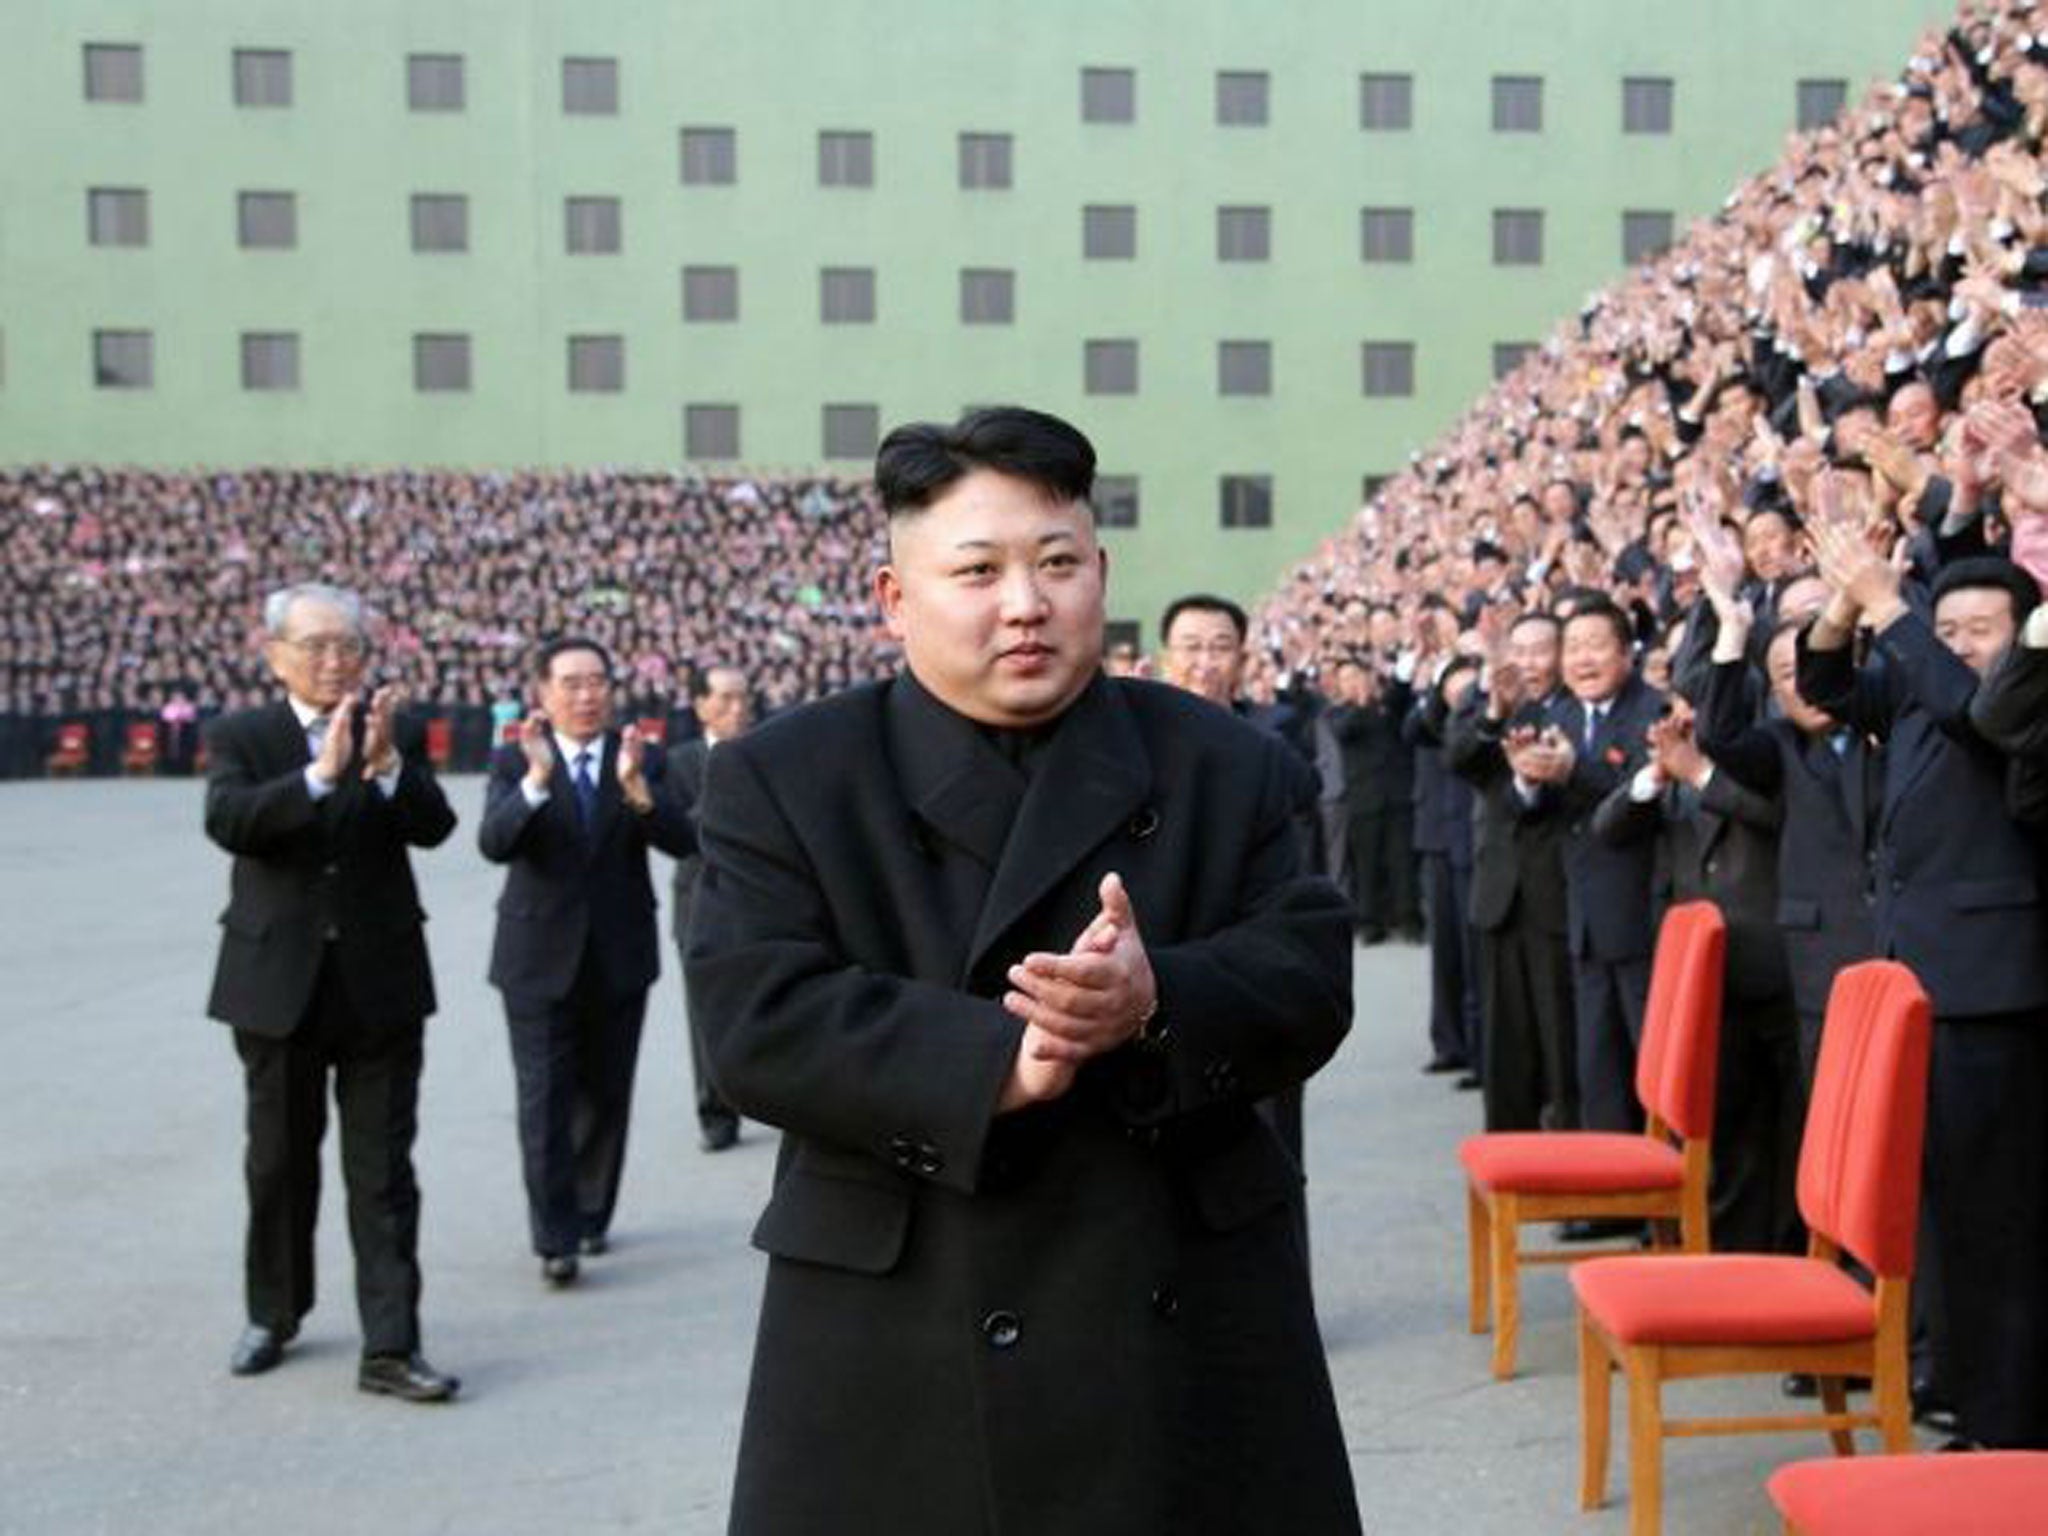 Kim Jong-un, the third in his family to rule the secretive state, is running unopposed in a legendary mountain district.